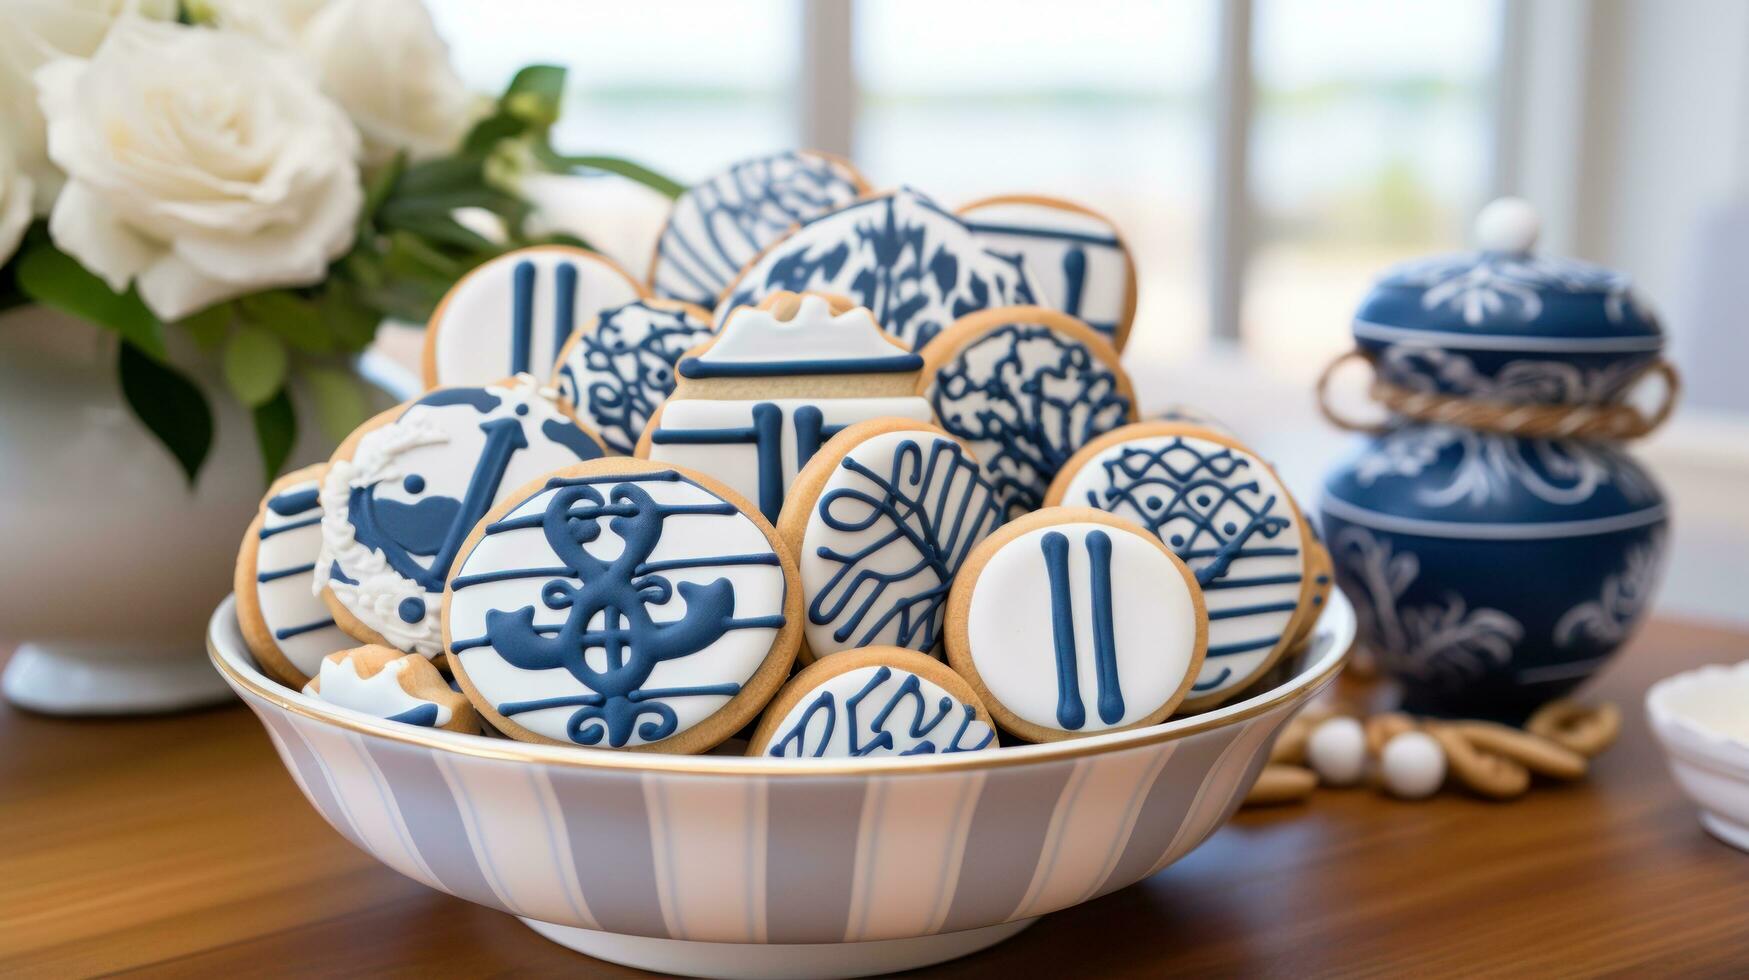 Nautical theme with blue and white decor, anchor, and sailboat cookies photo